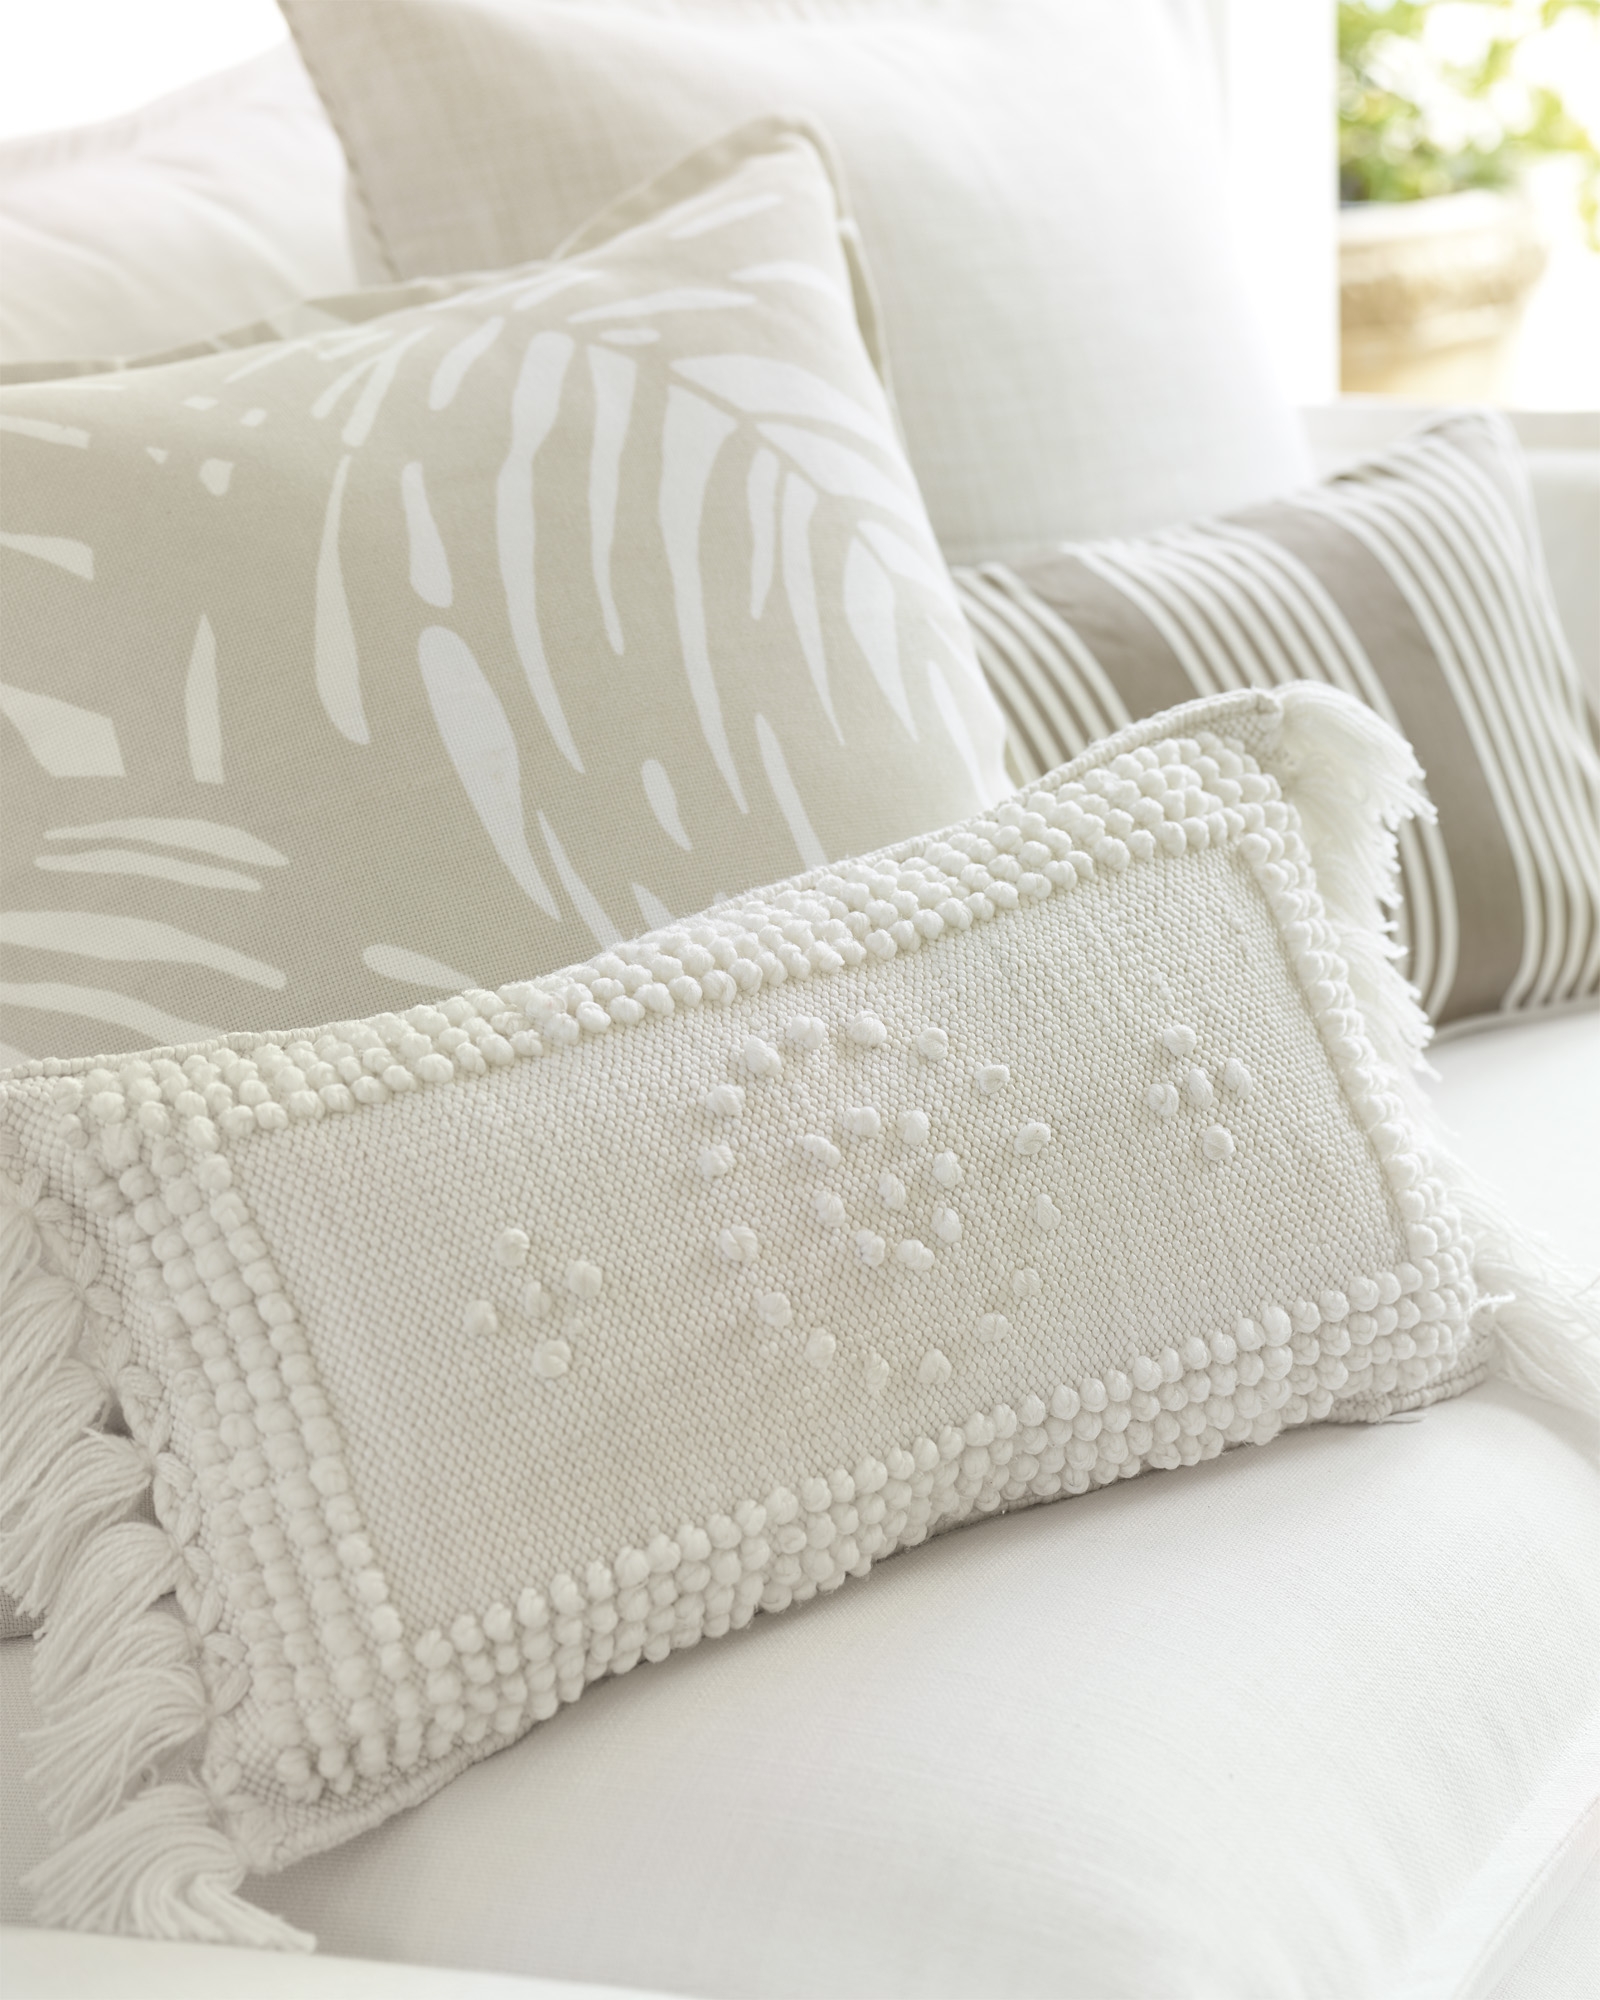 Montecito Outdoor 12" x 21" Pillow Cover - Ivory - Insert sold separately - Image 3